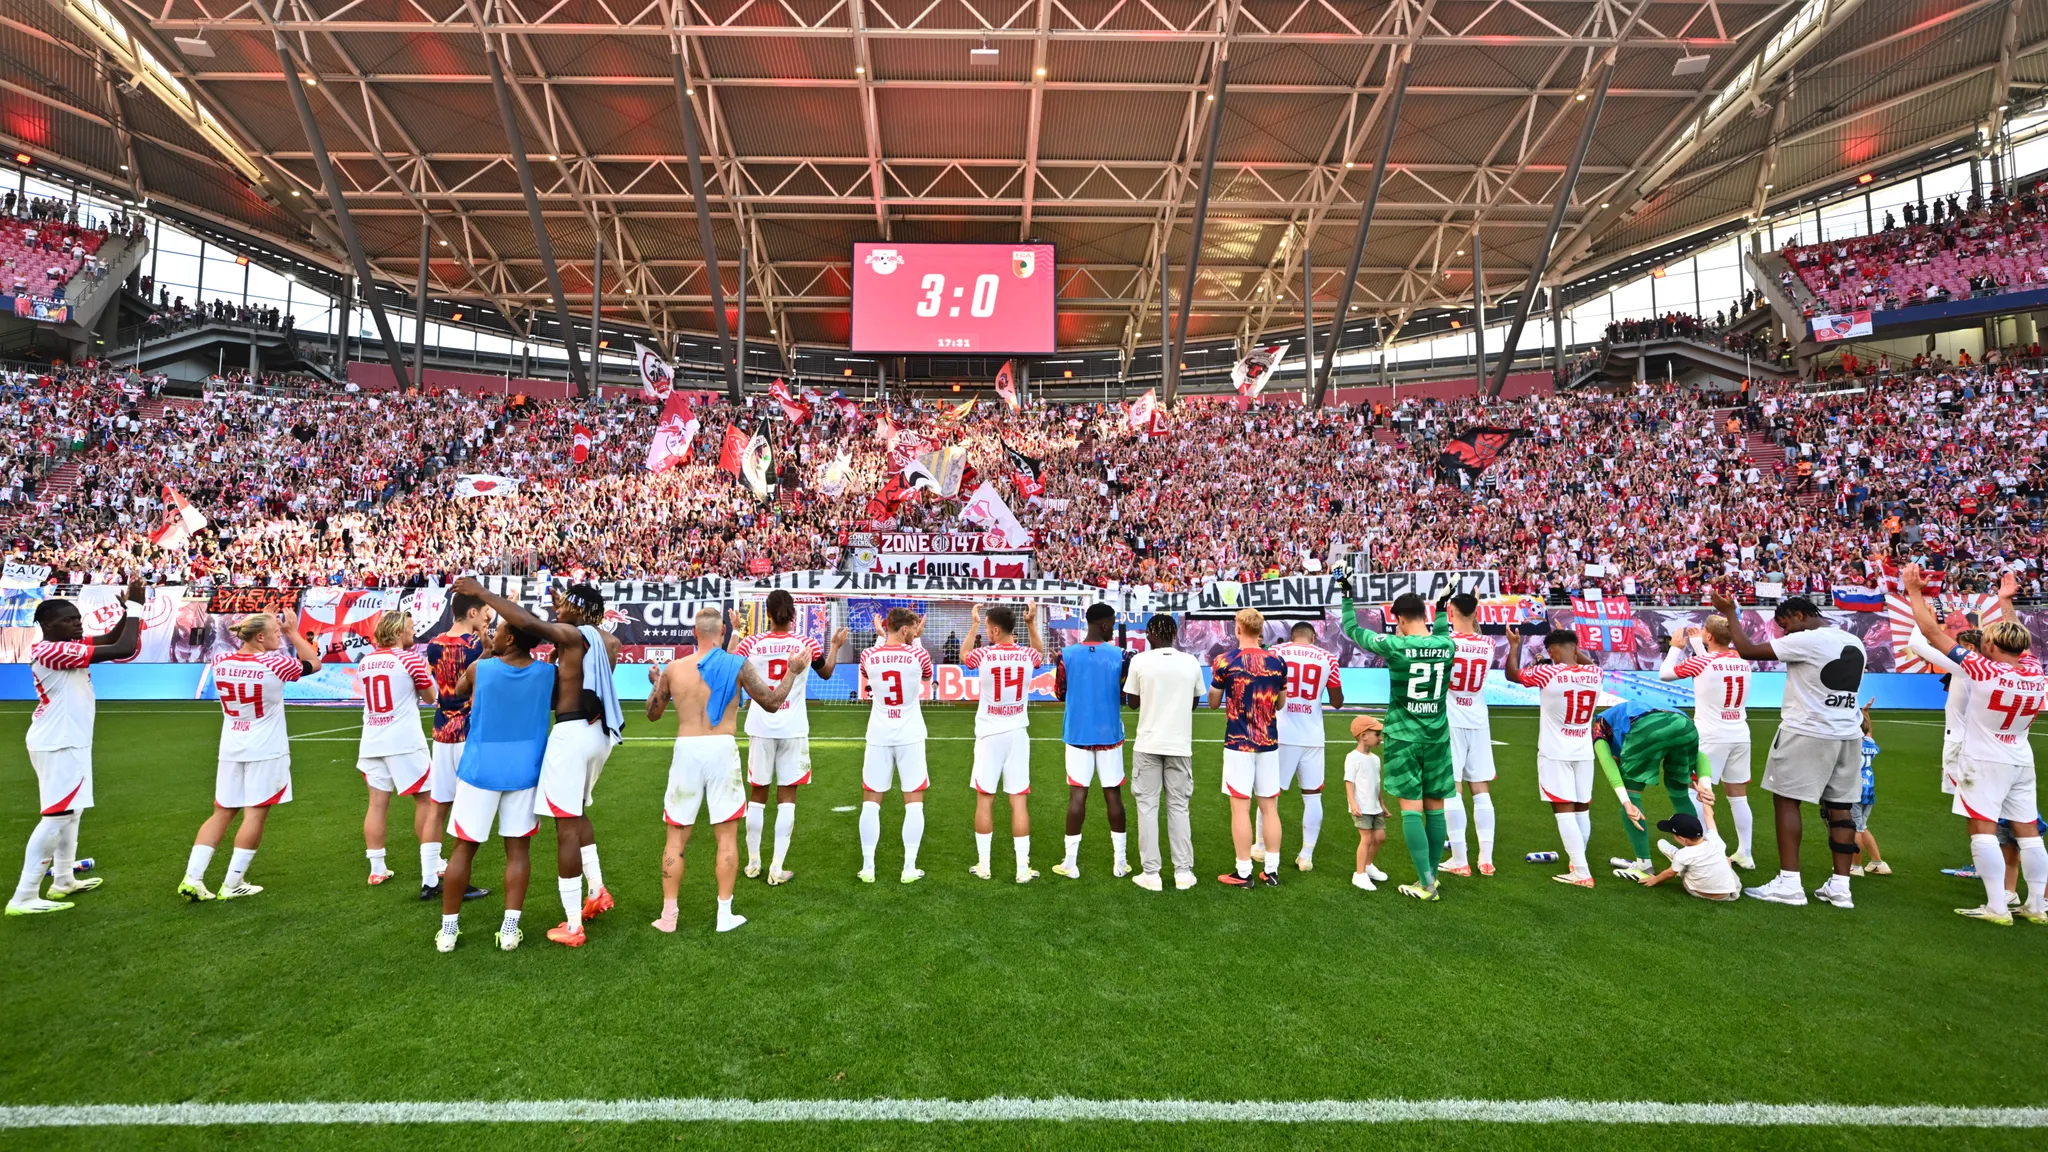 The players celebrate the 3-0 win over FC Augsburg.